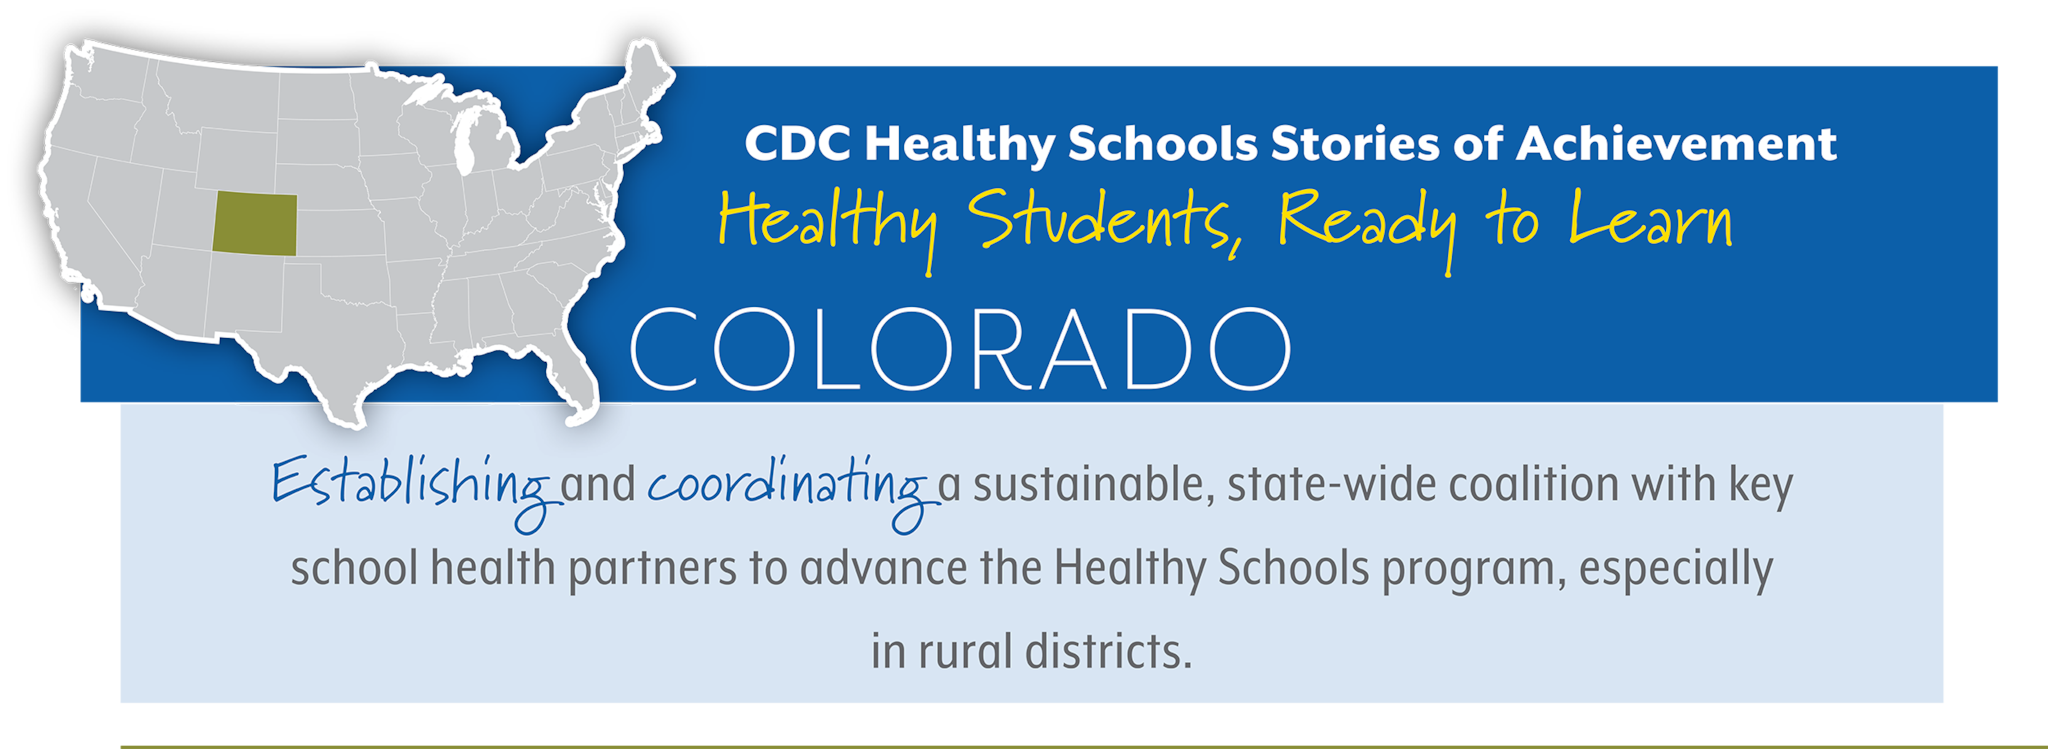 CDC Healthy Schools State Success Stories  Healthy Students, Ready to Learn  COLORADO Establishing and coordinating a sustainable, state-wide coalition with key school health partners to advance the Healthy Schools program, especially  in rural districts.